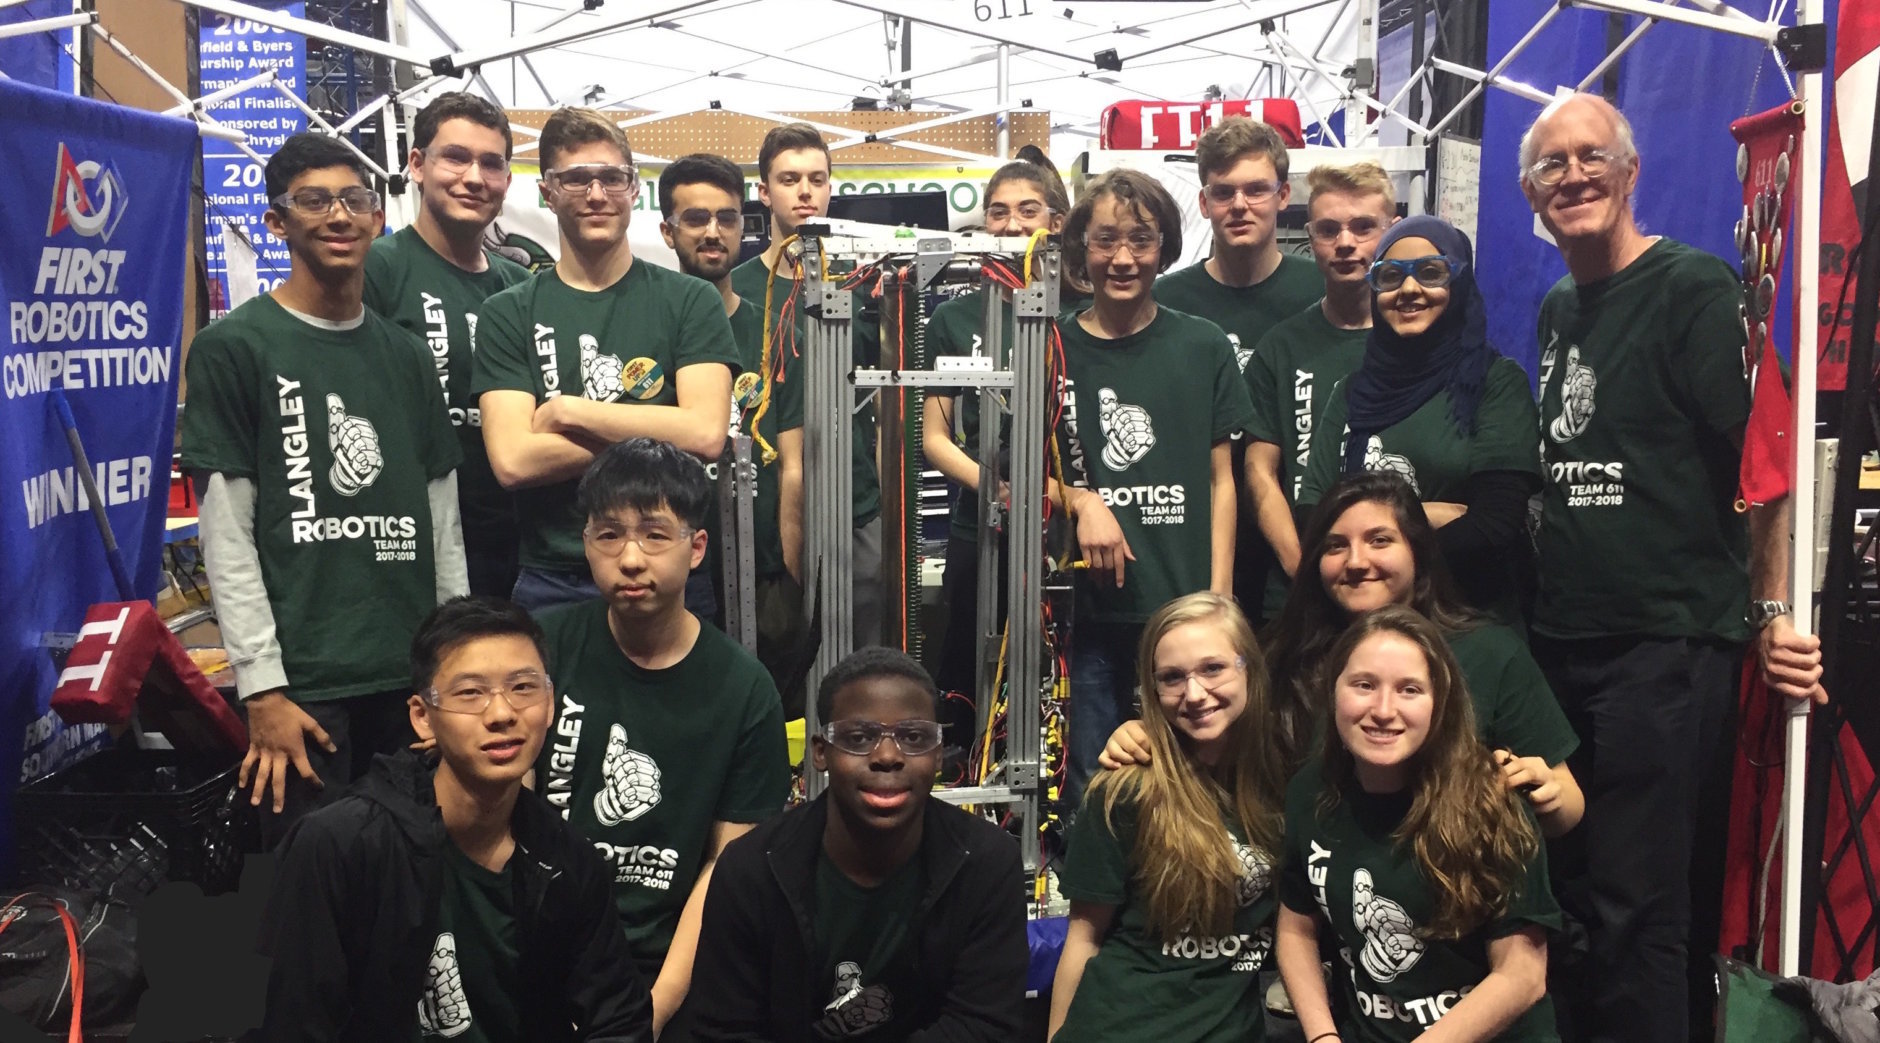 The Langley High School robotics team, pictured at the District Championship at the University of Maryland, will be going to the world championships in Detroit next week. (Courtesy of Amy and Derrick Swaak)